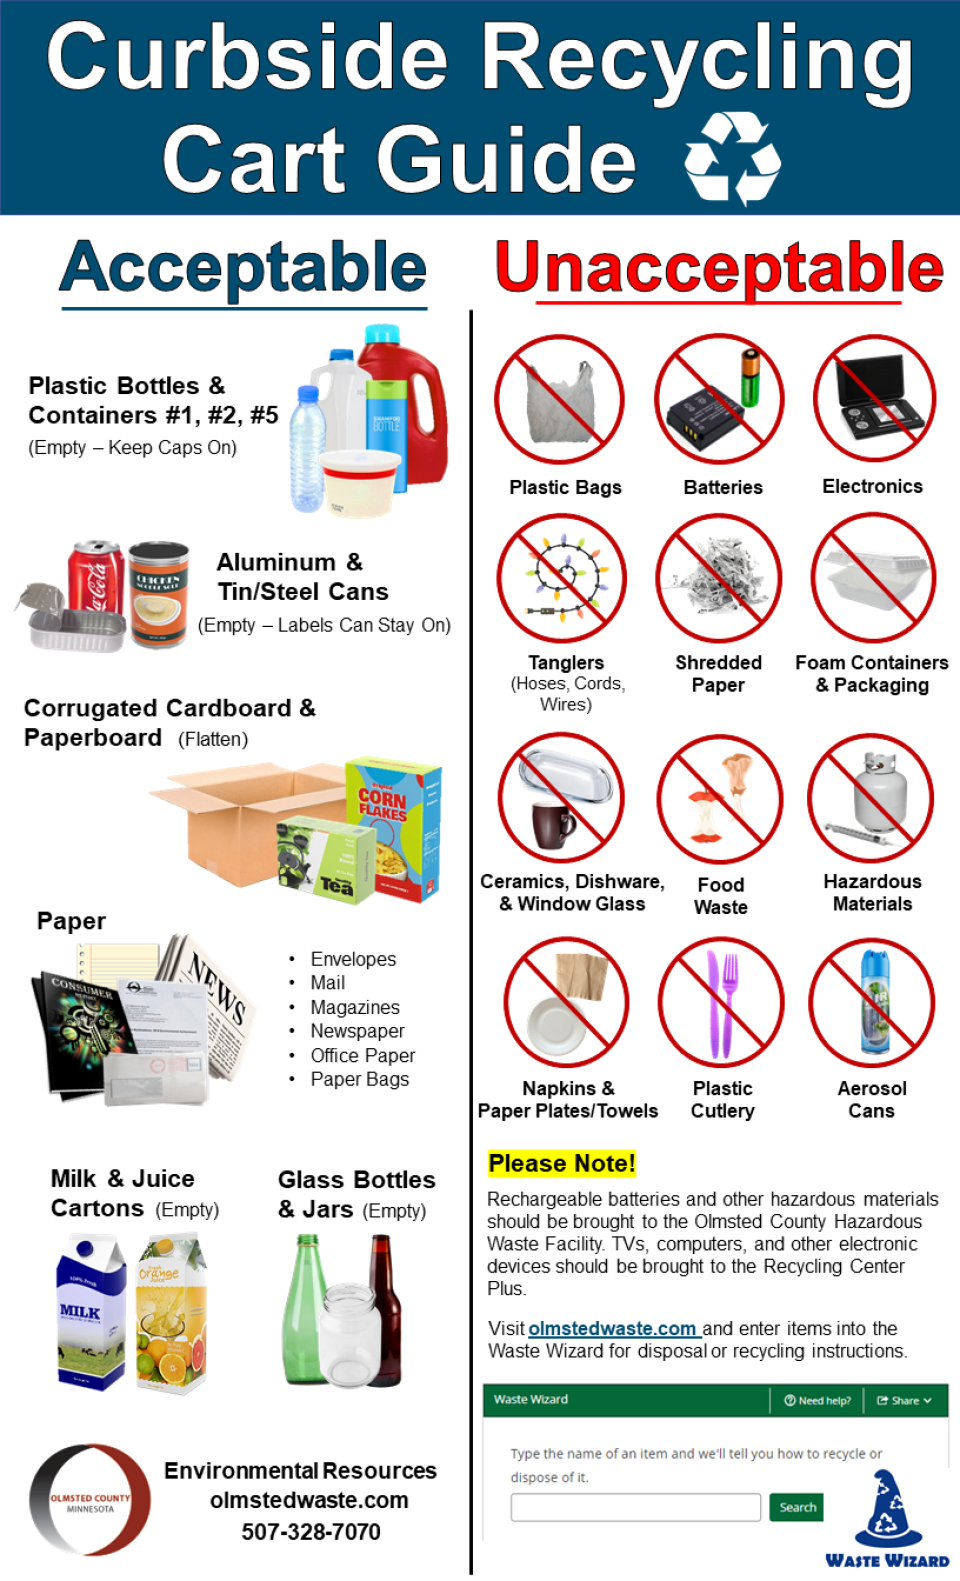 This is a visual representation of acceptable and unacceptable items in a curbside recycling cart. The text on the page below lists the same acceptable and unacceptable items. 